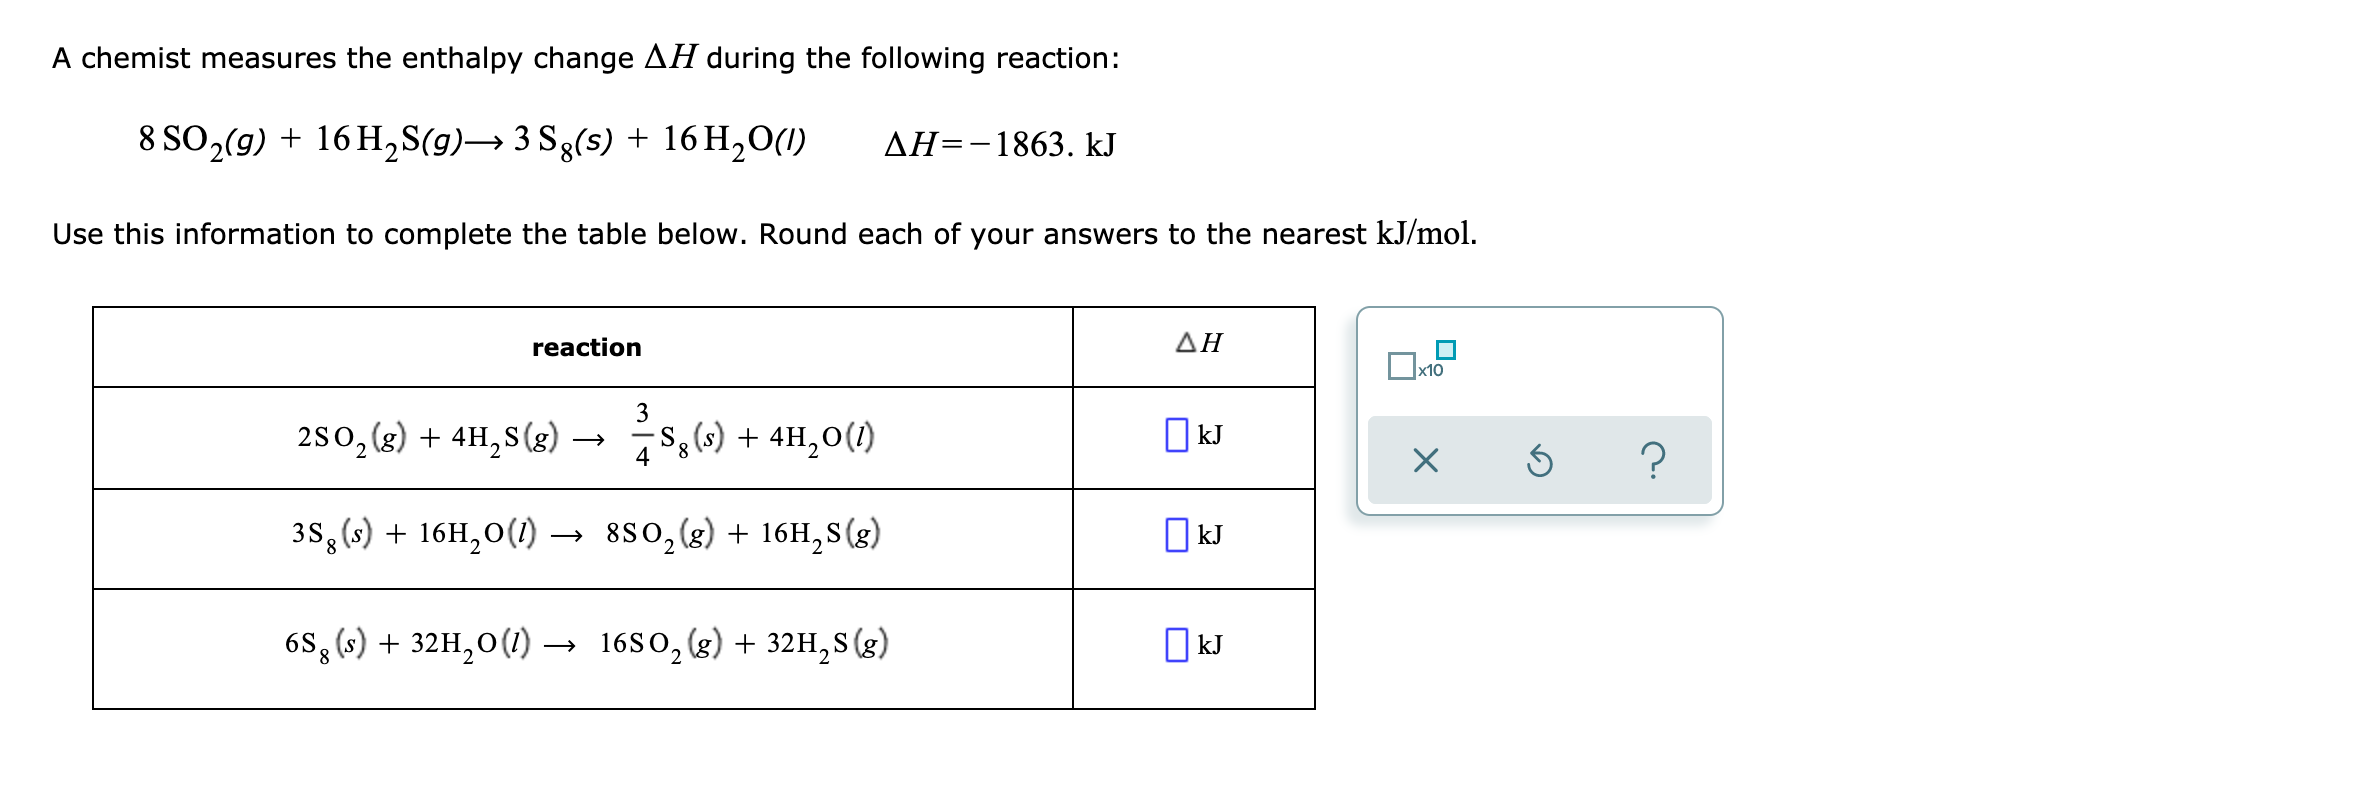 A chemist measures the enthalpy change AH during the following reaction:
8 SO2(9) + 16 H,S(g)→ 3 Sg(s) + 16 H,0(1)
ДН--1863. kJ
Use this information to complete the table below. Round each of your answers to the nearest kJ/mol.
reaction
ΔΗ
x10
3
280, (2) + 4H,8 (g) → s,6) + 4H,0(1)
O kJ
3S,(s) + 16H,0(1)
–→ 880,(g) + 16H,S(g)
| kJ
6S, (s) + 32H,0(1)
1680, (g) + 32H,S(g)
O kJ
